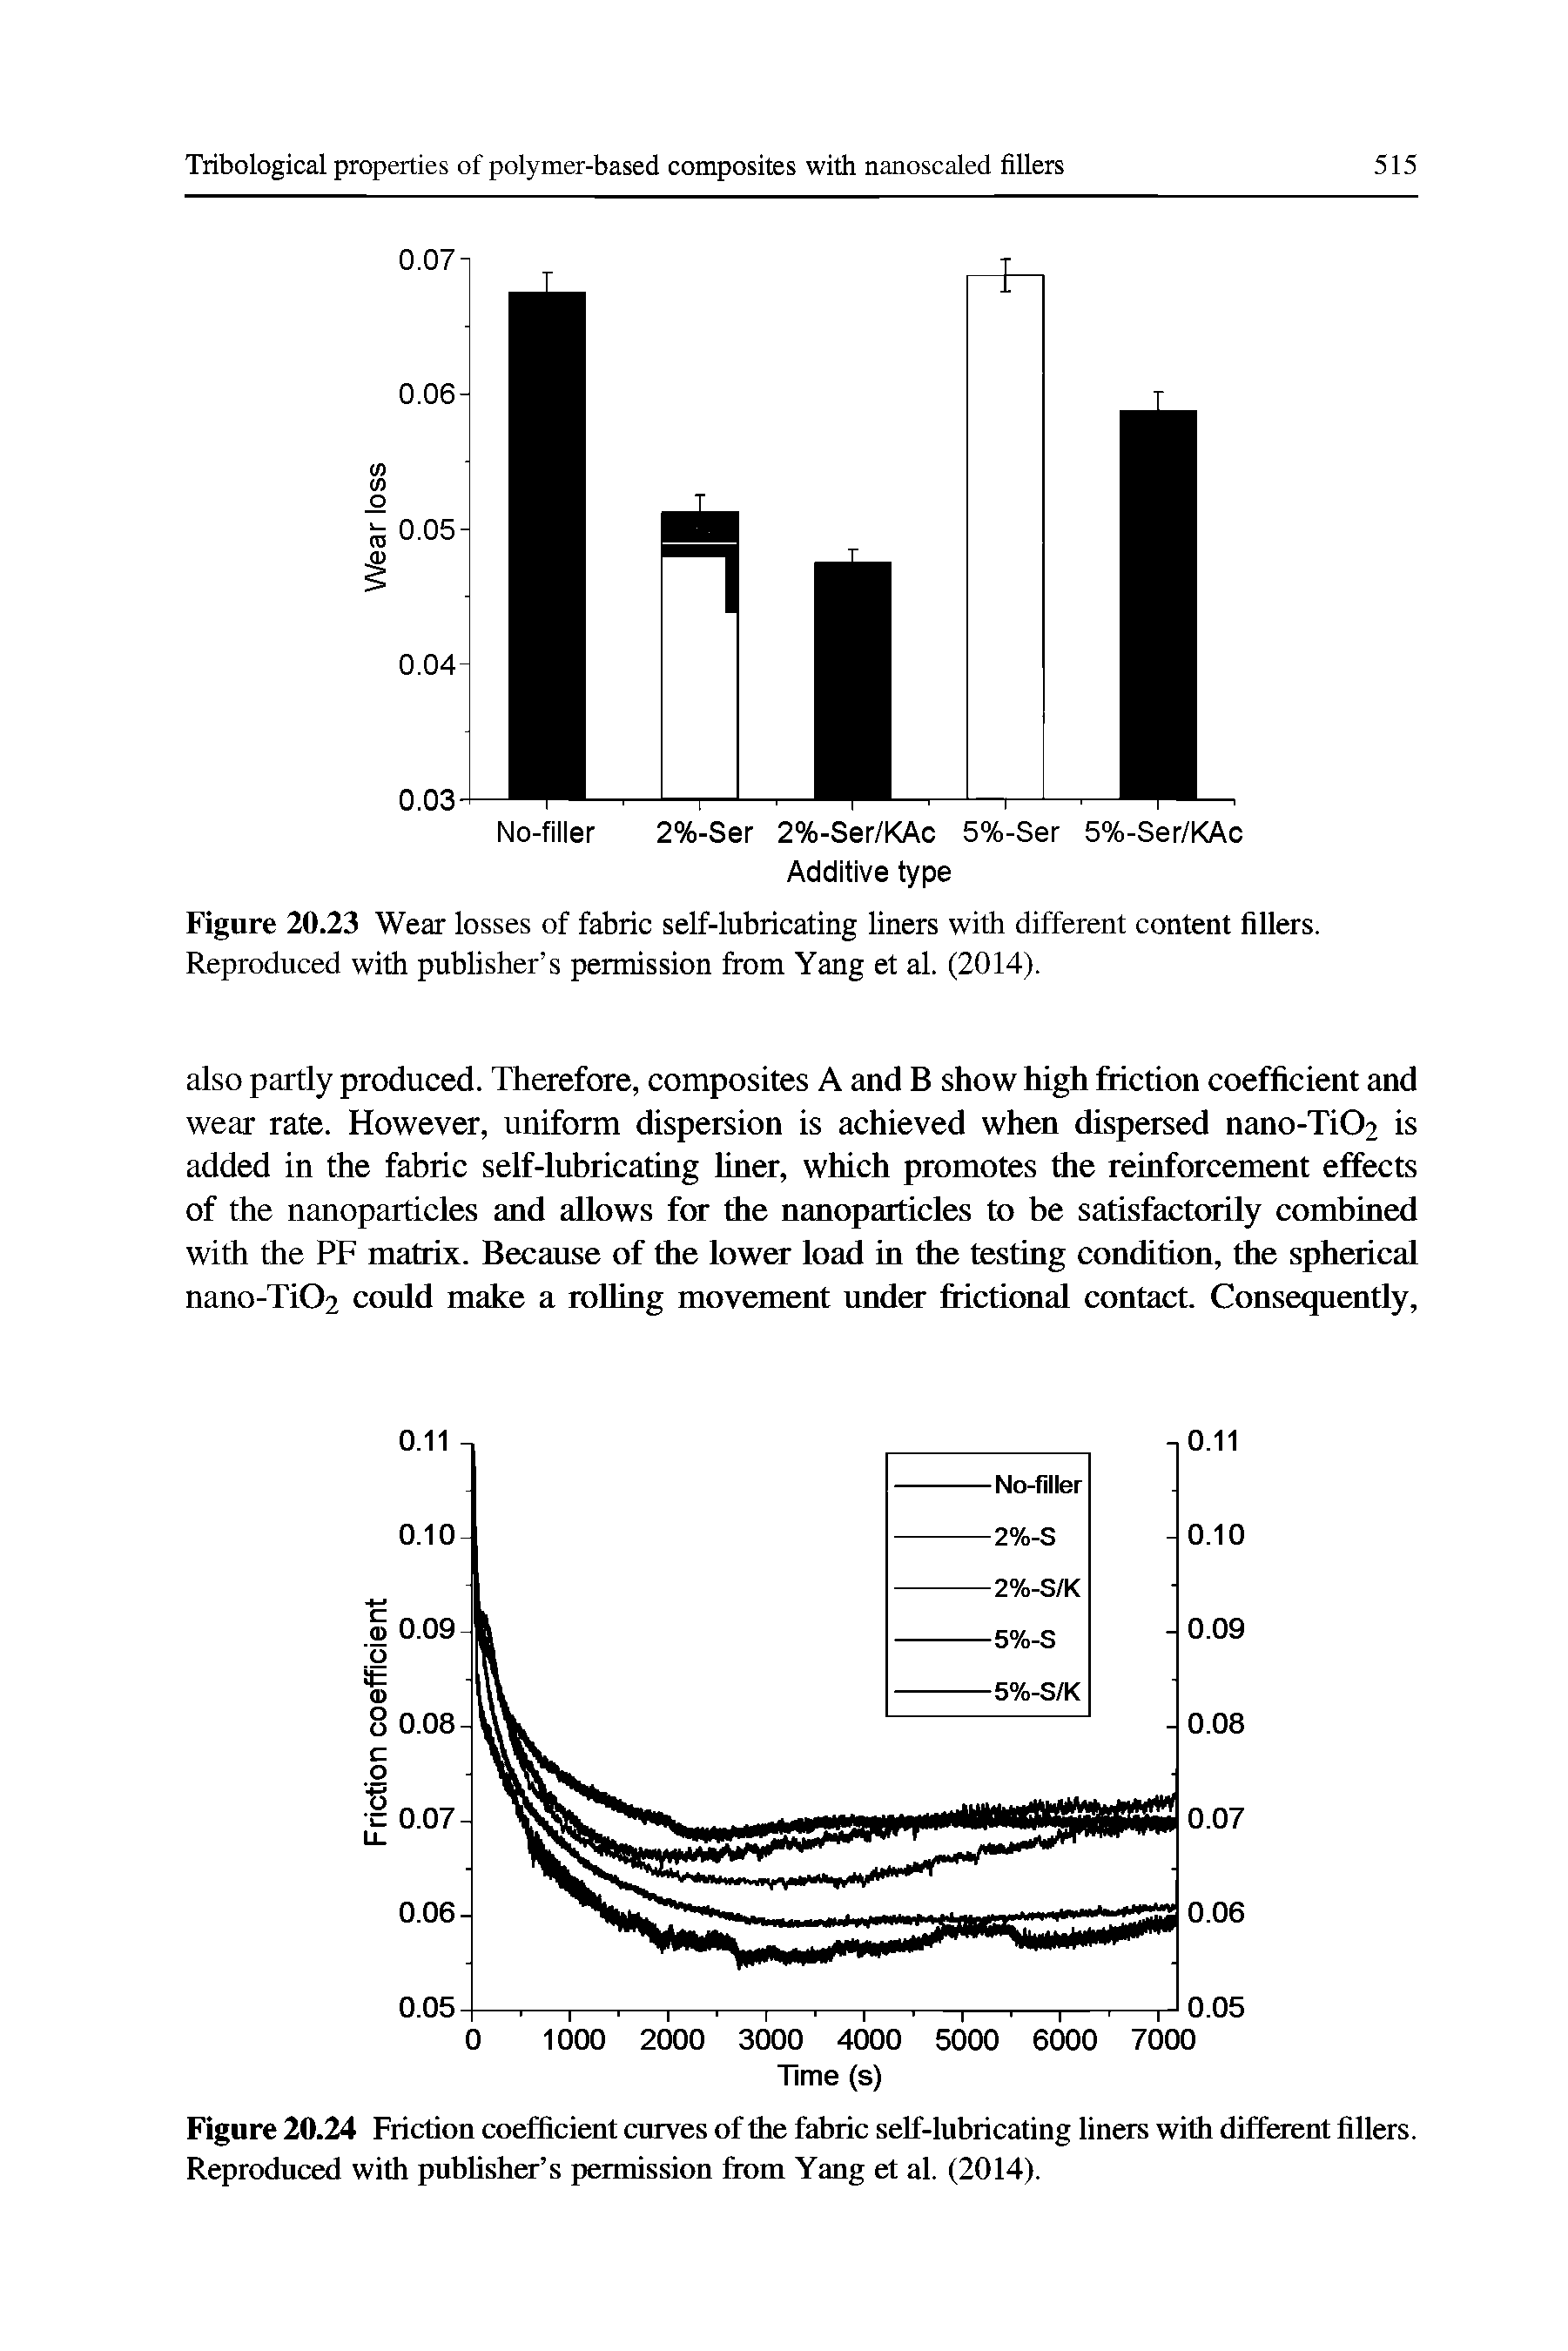 Figure 20.23 Wear losses of fabric self-lubricating liners with different content fillers. Reproduced with publisher s permission from Yang et al. (2014).